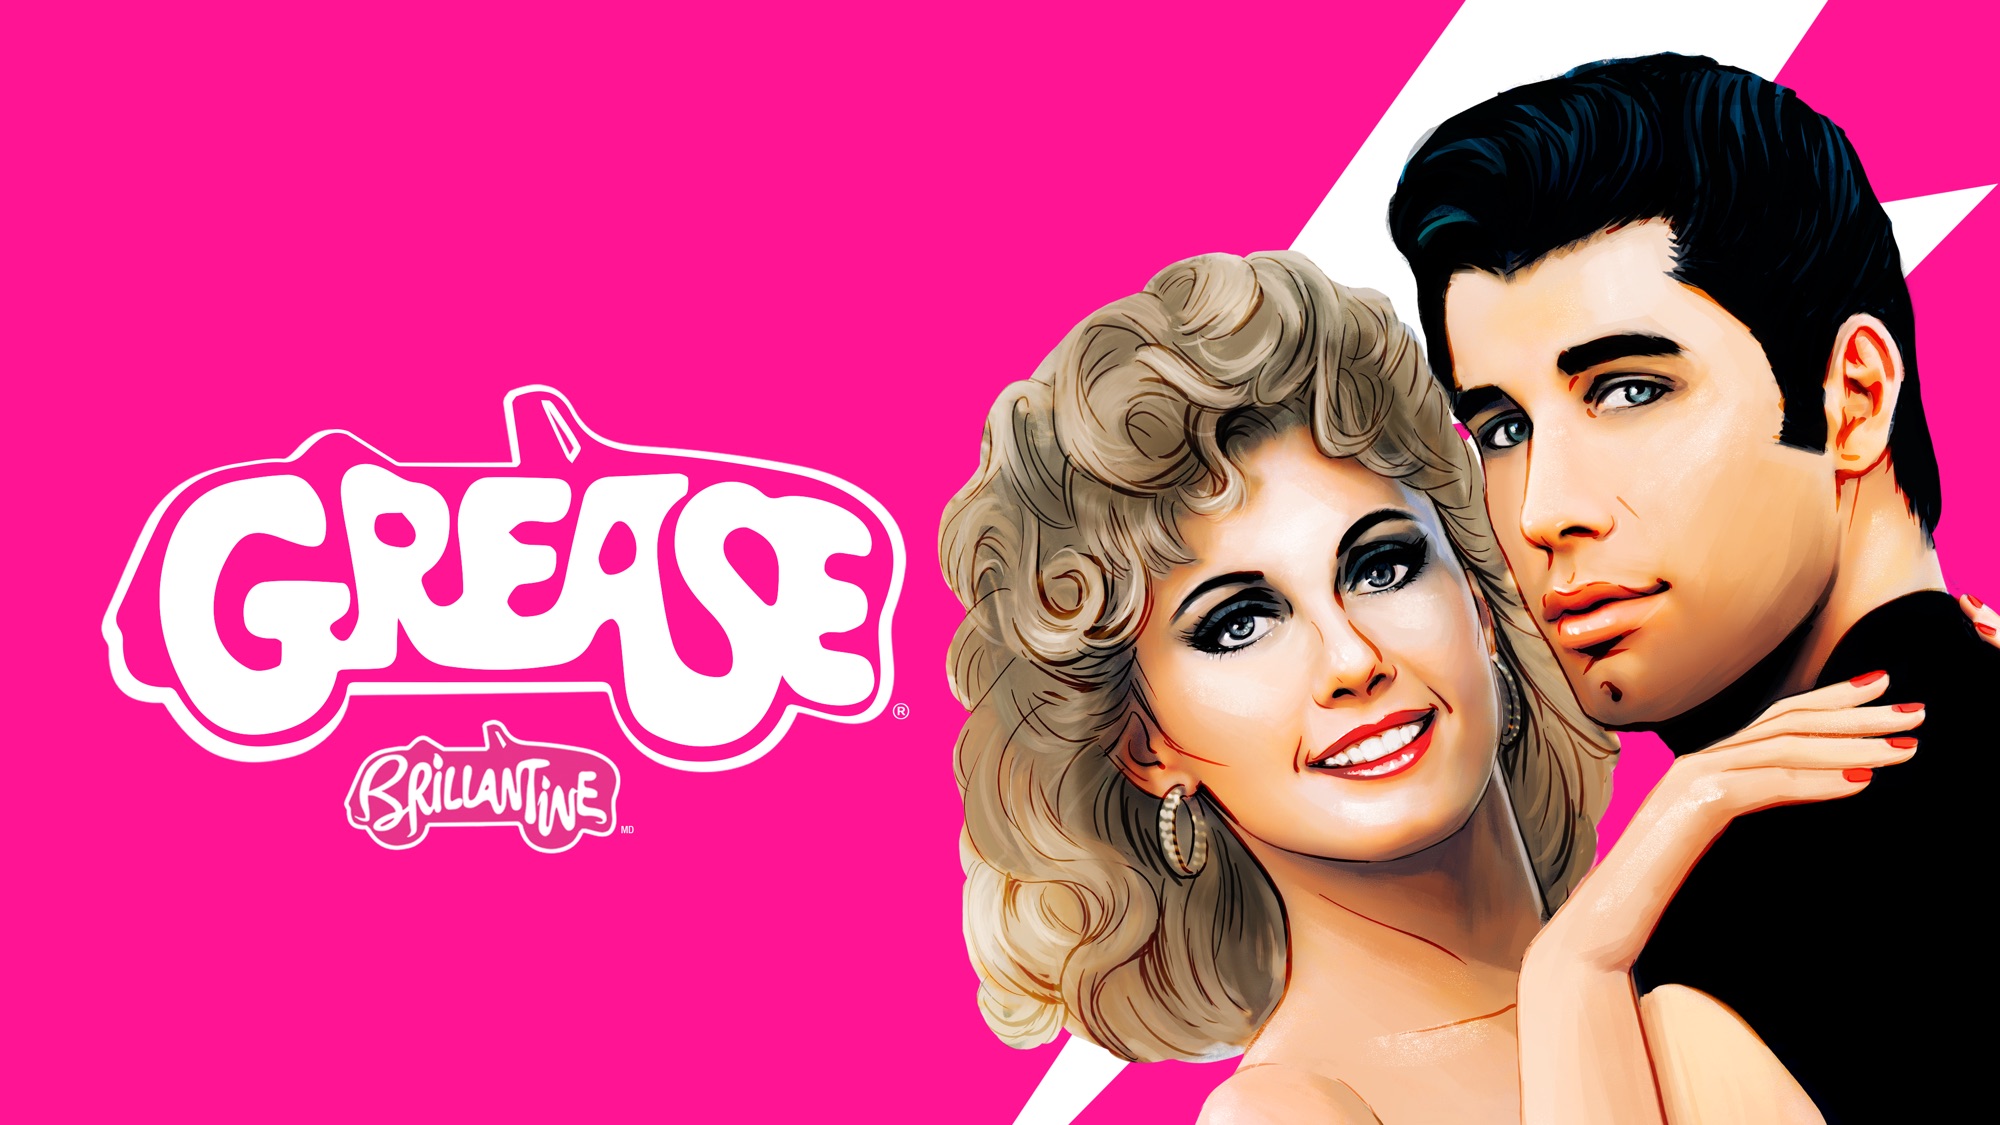 Grease hd papers and backgrounds